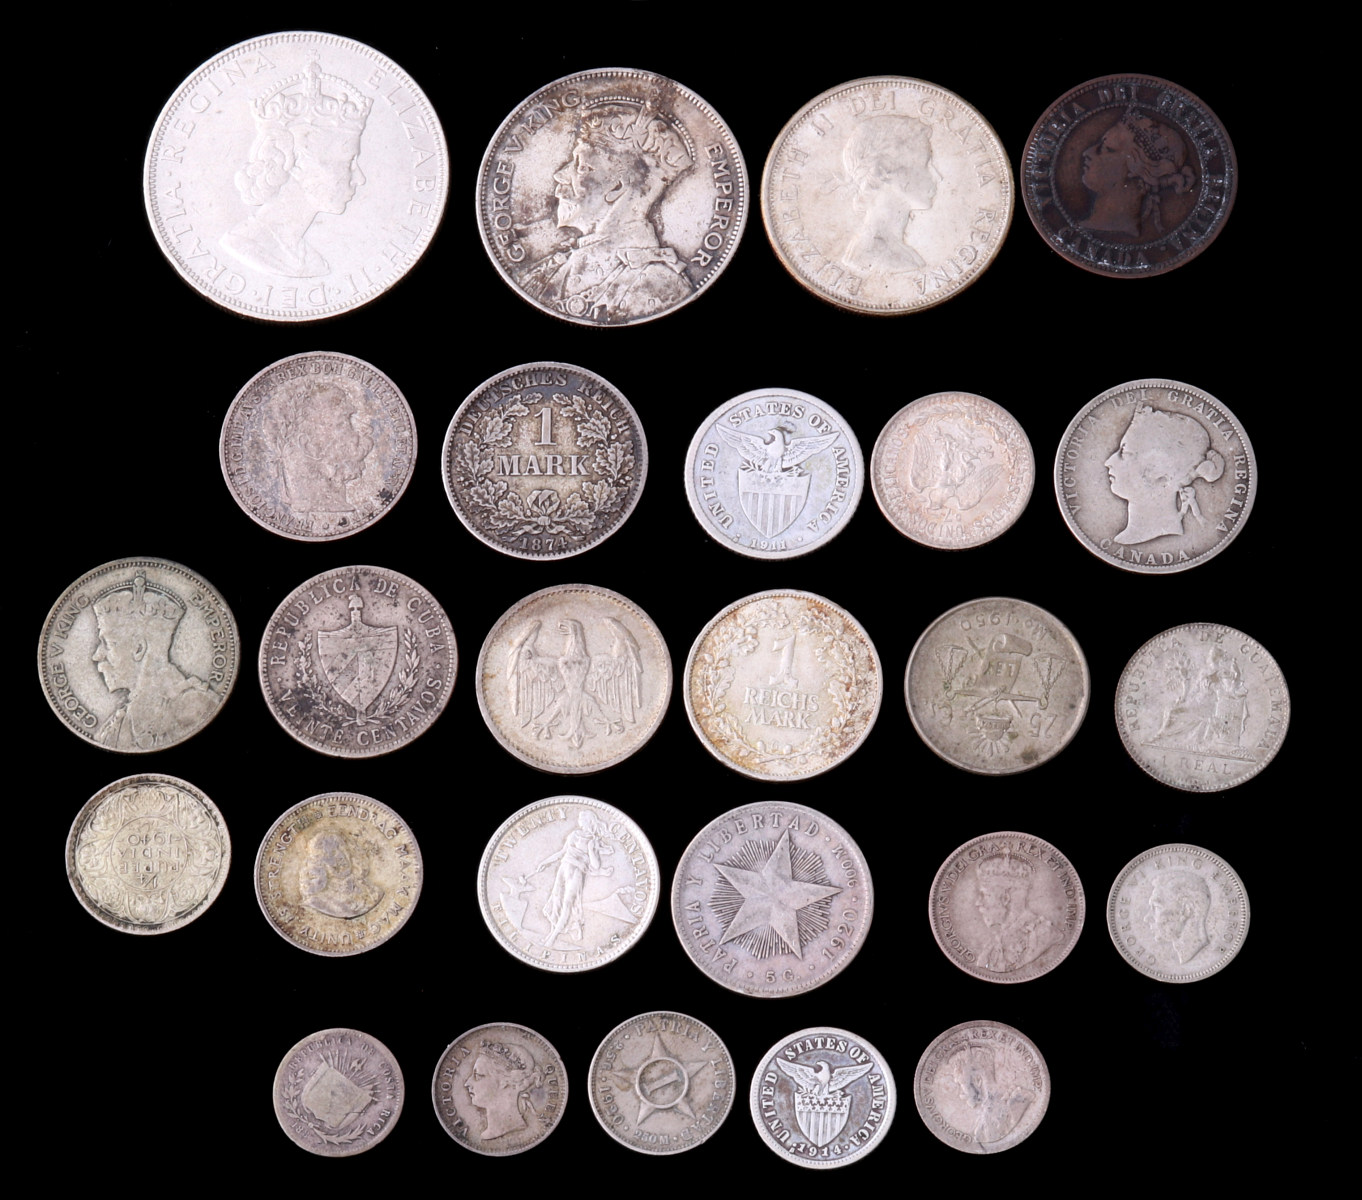 FORTY-EIGHT PIECES OF INTERNATIONAL COINAGE